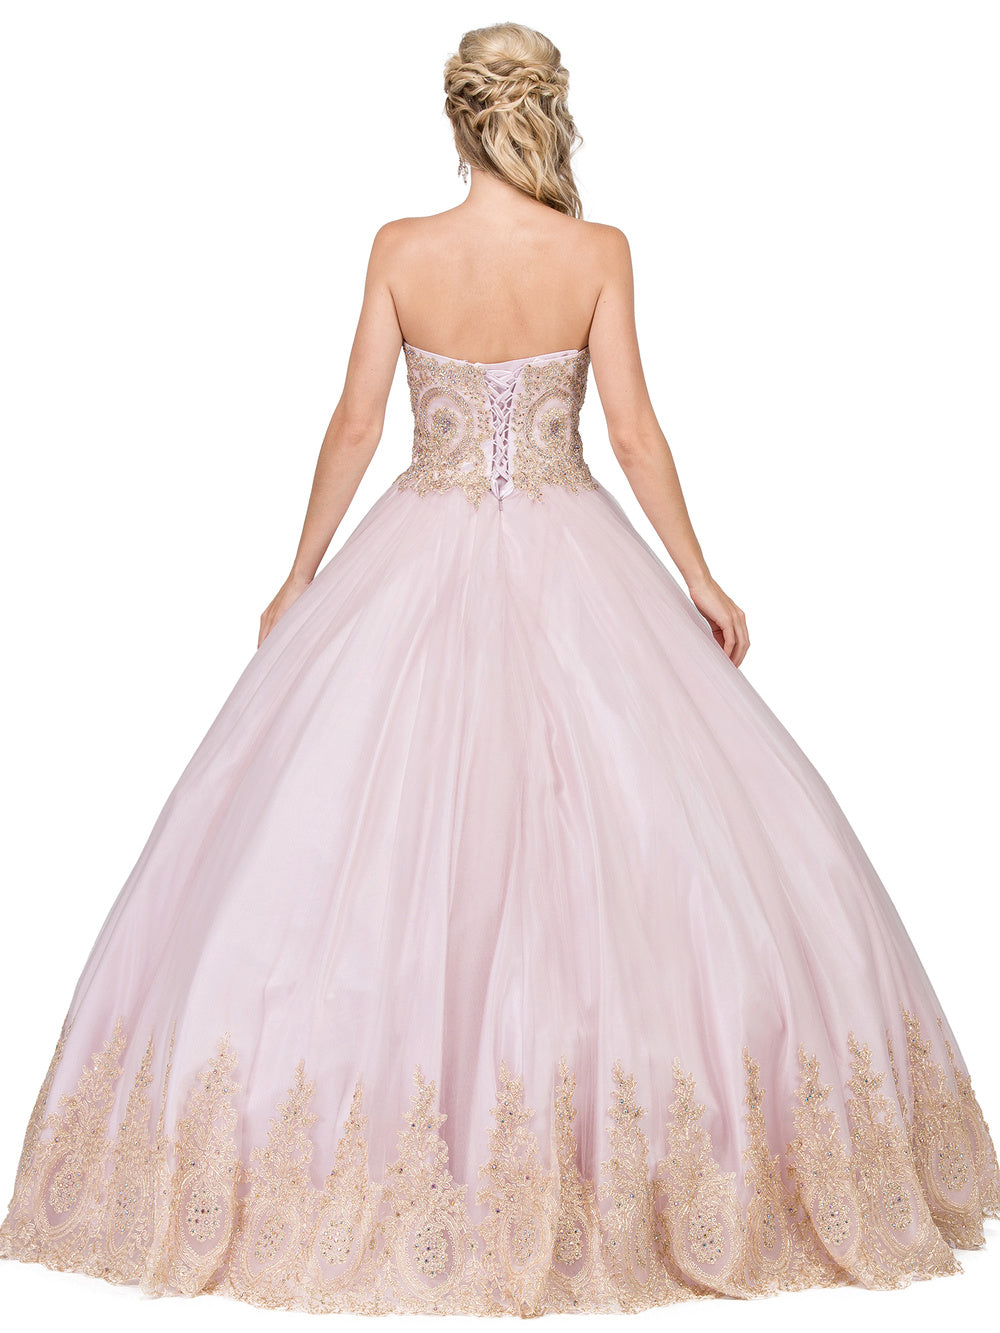 Dancing Queen - 1115 Strapless Sweetheart Embroidered Lace Ballgown In Pink